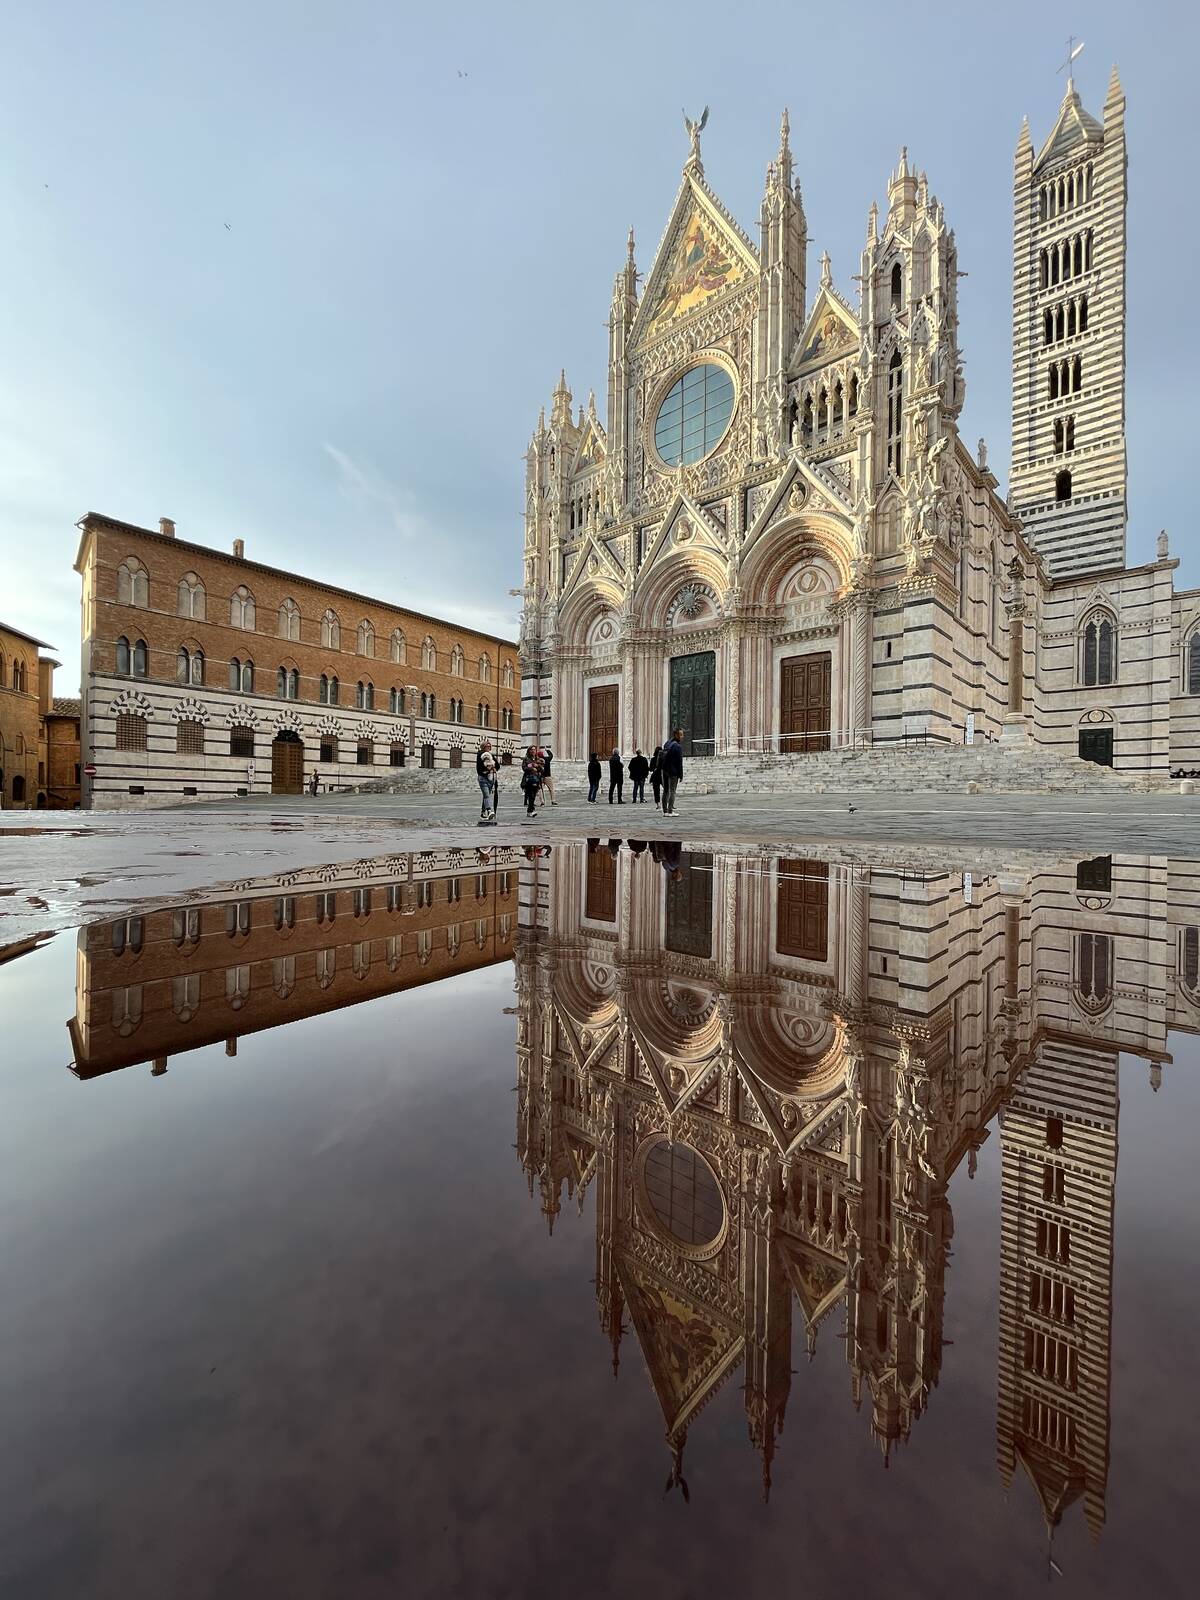 Image of Piazza del Duomo by Karin Duarte